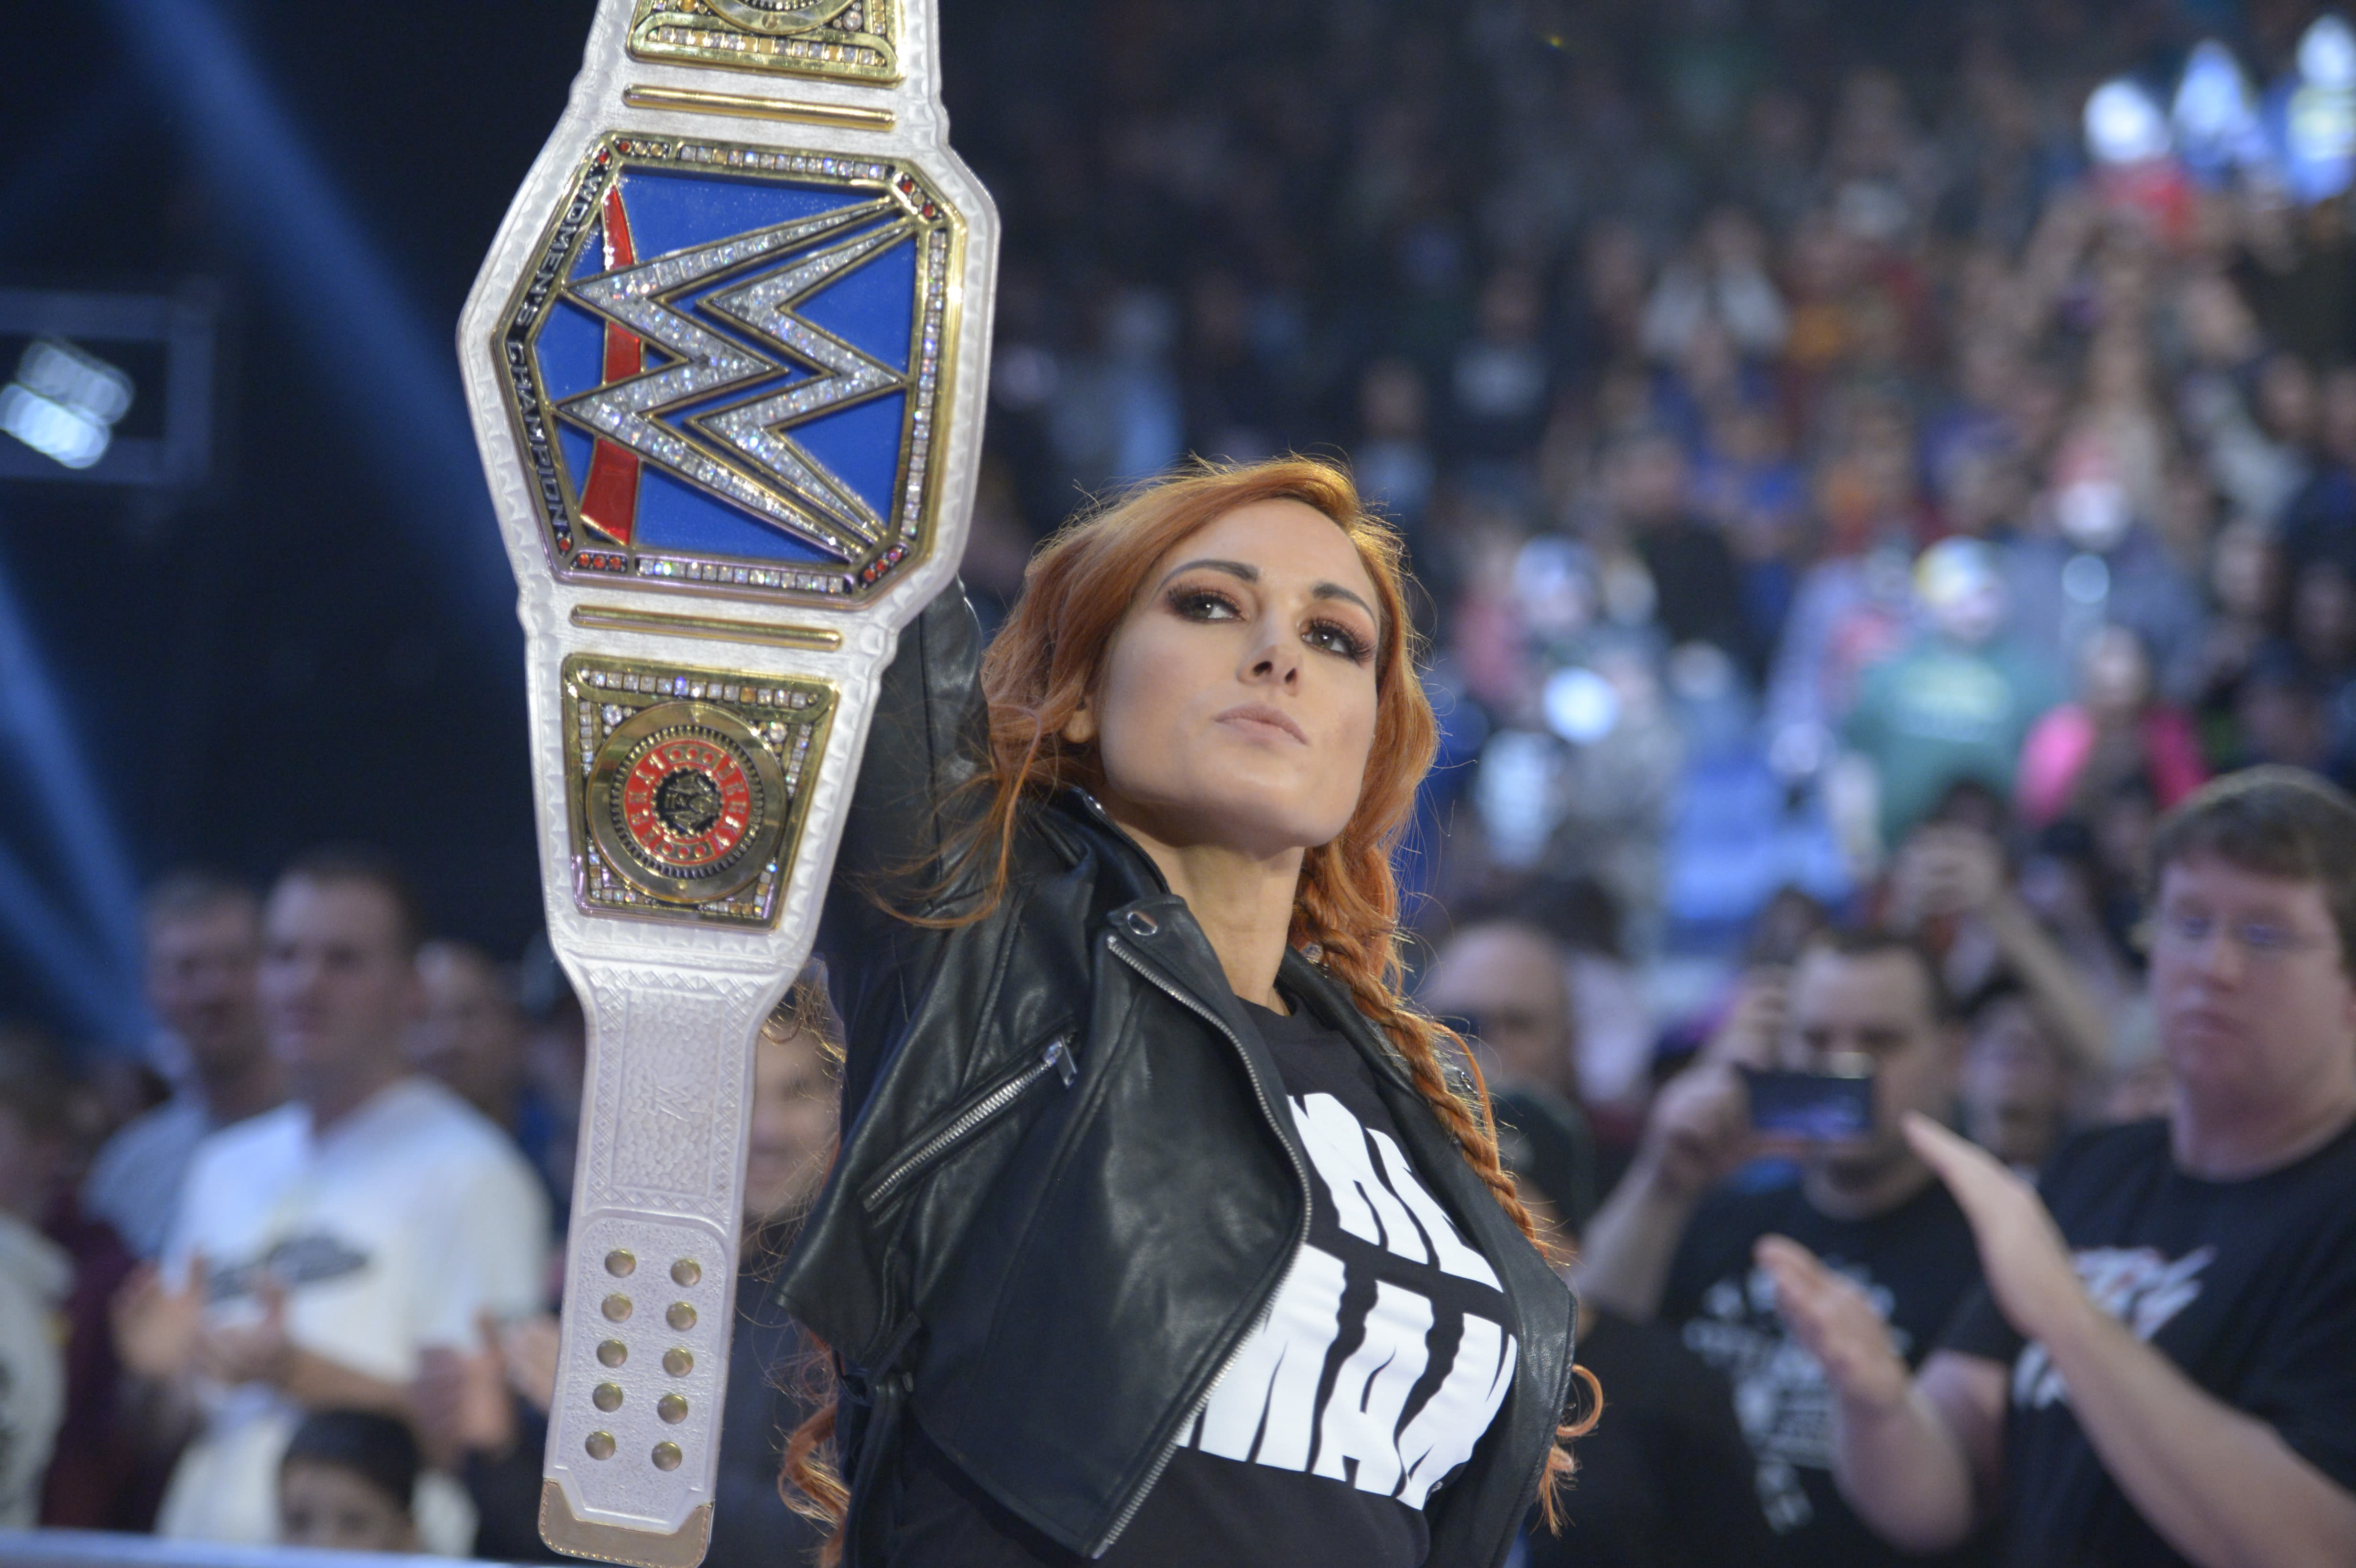 Rebecca Quin Aka Wwe Star Becky Lynch Has Become One Of The Biggest 4324